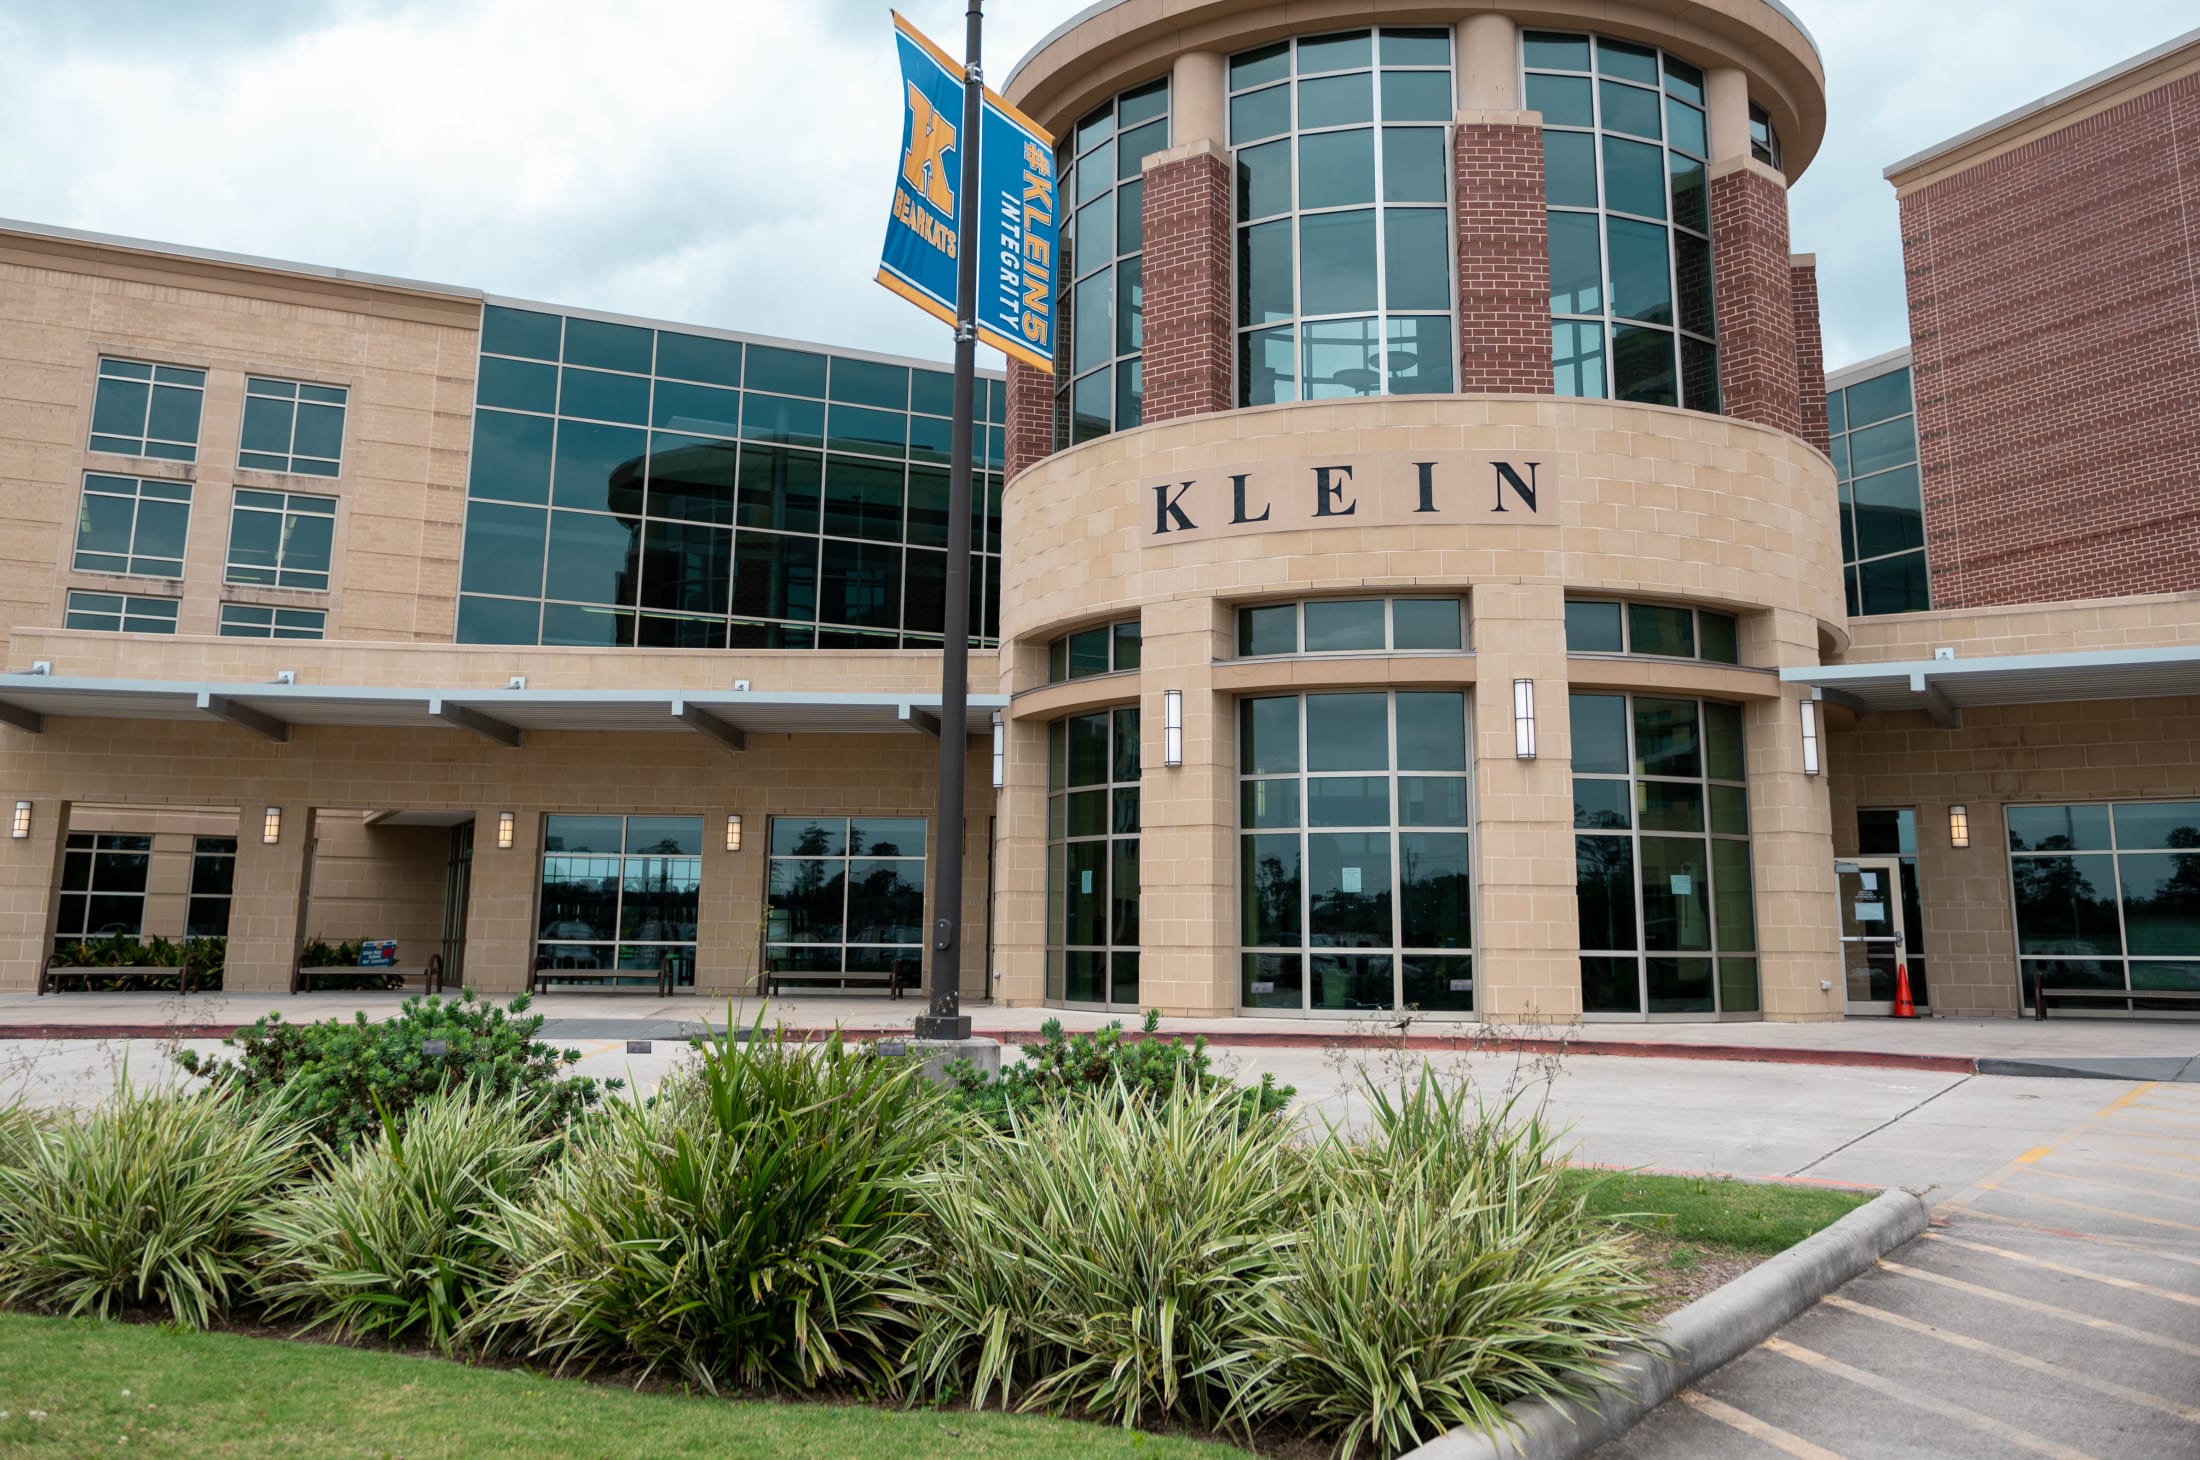 Klein High Ranked Top 25 School in Houston – The Bearchat